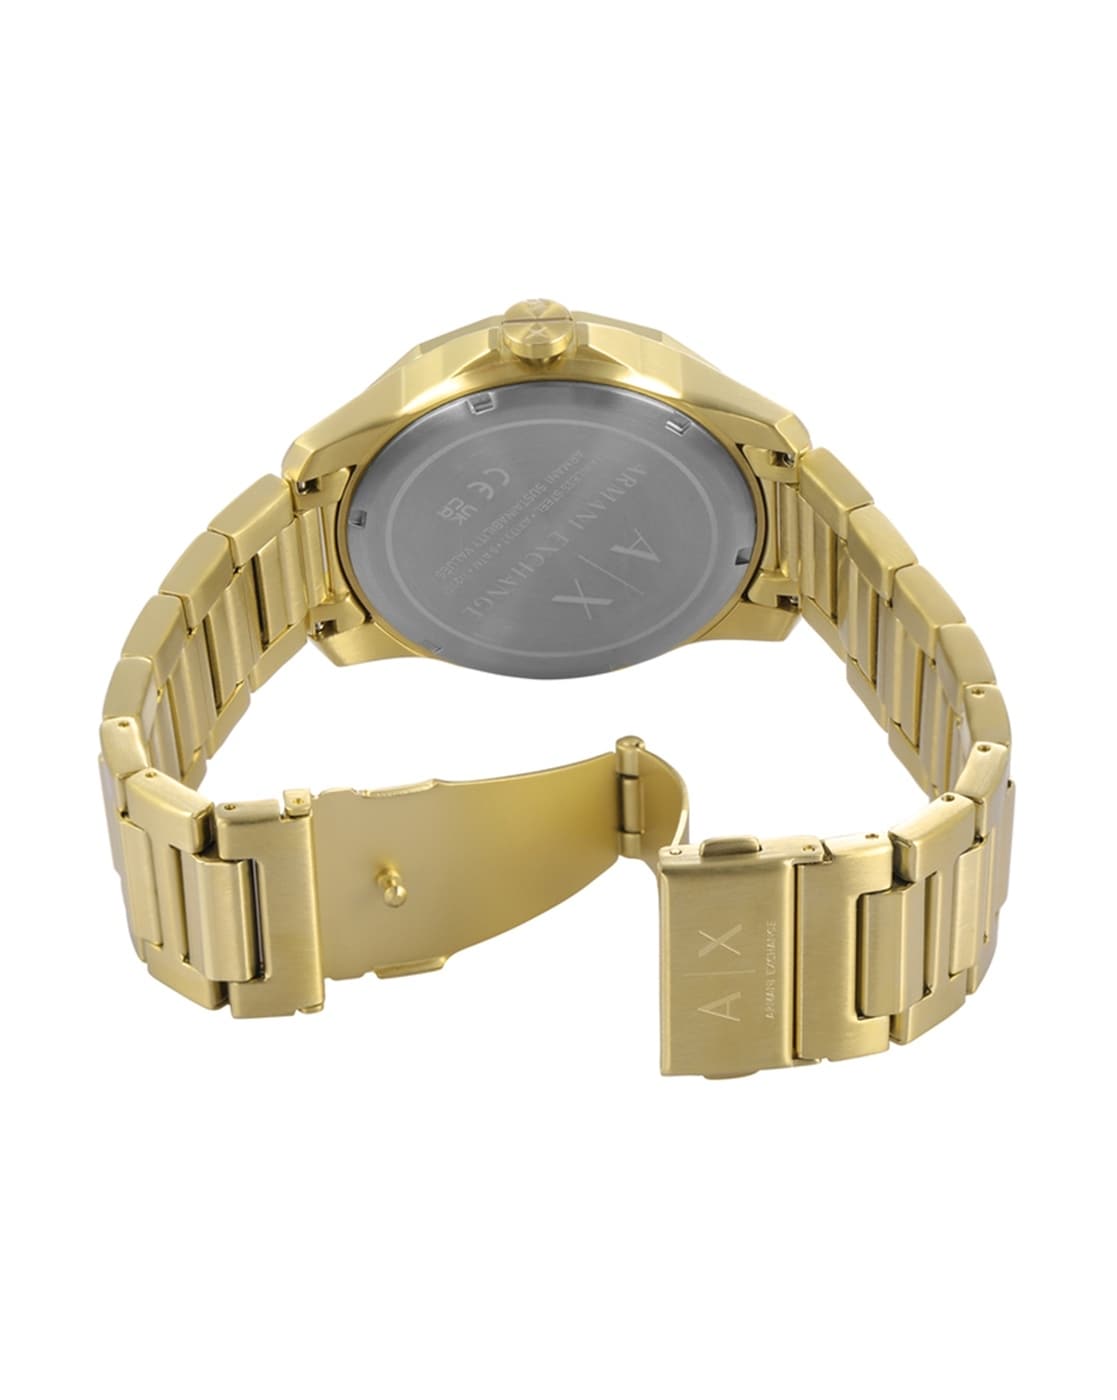 Watches by ARMANI for Gold-Toned EXCHANGE Buy Men Online